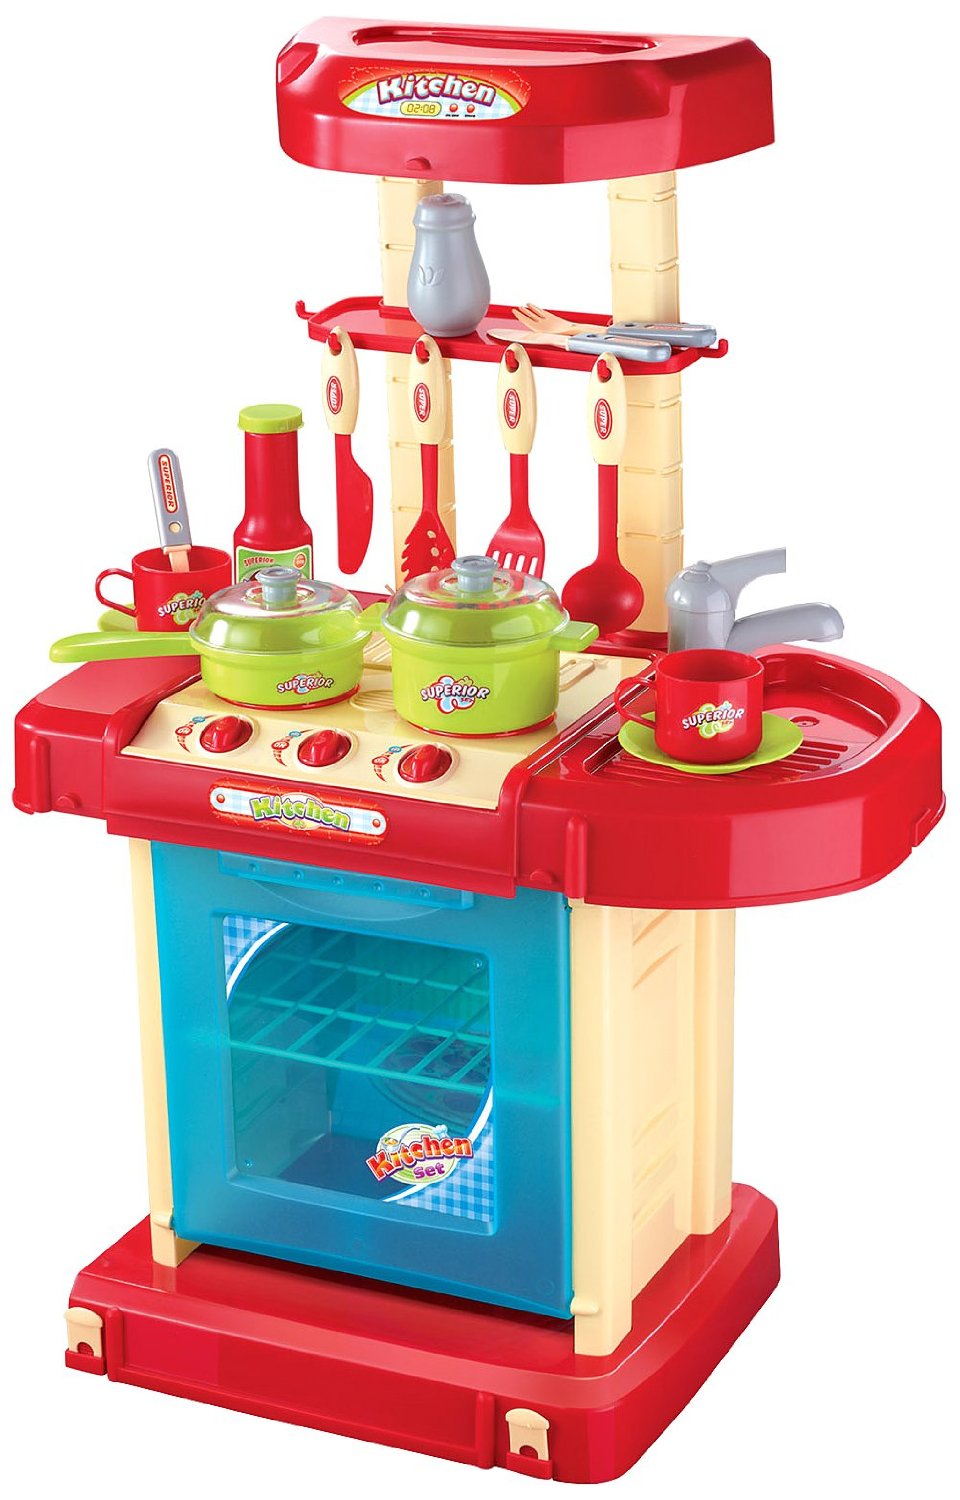 Berry Toys Play and Carry Plastic Play Kitchen Only $20.29 on Amazon!